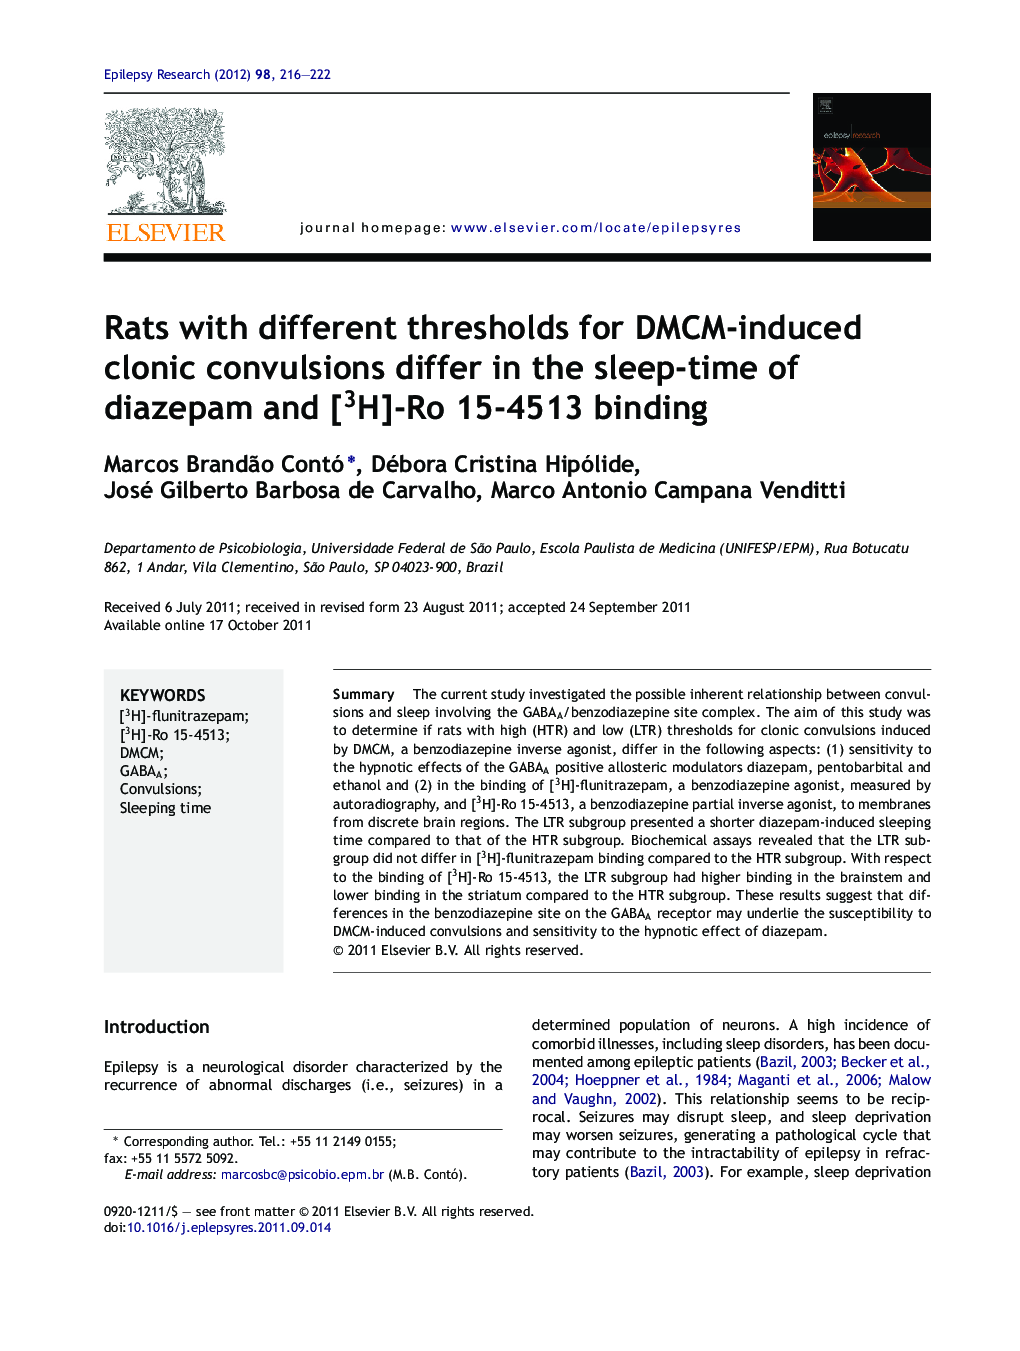 Rats with different thresholds for DMCM-induced clonic convulsions differ in the sleep-time of diazepam and [3H]-Ro 15-4513 binding